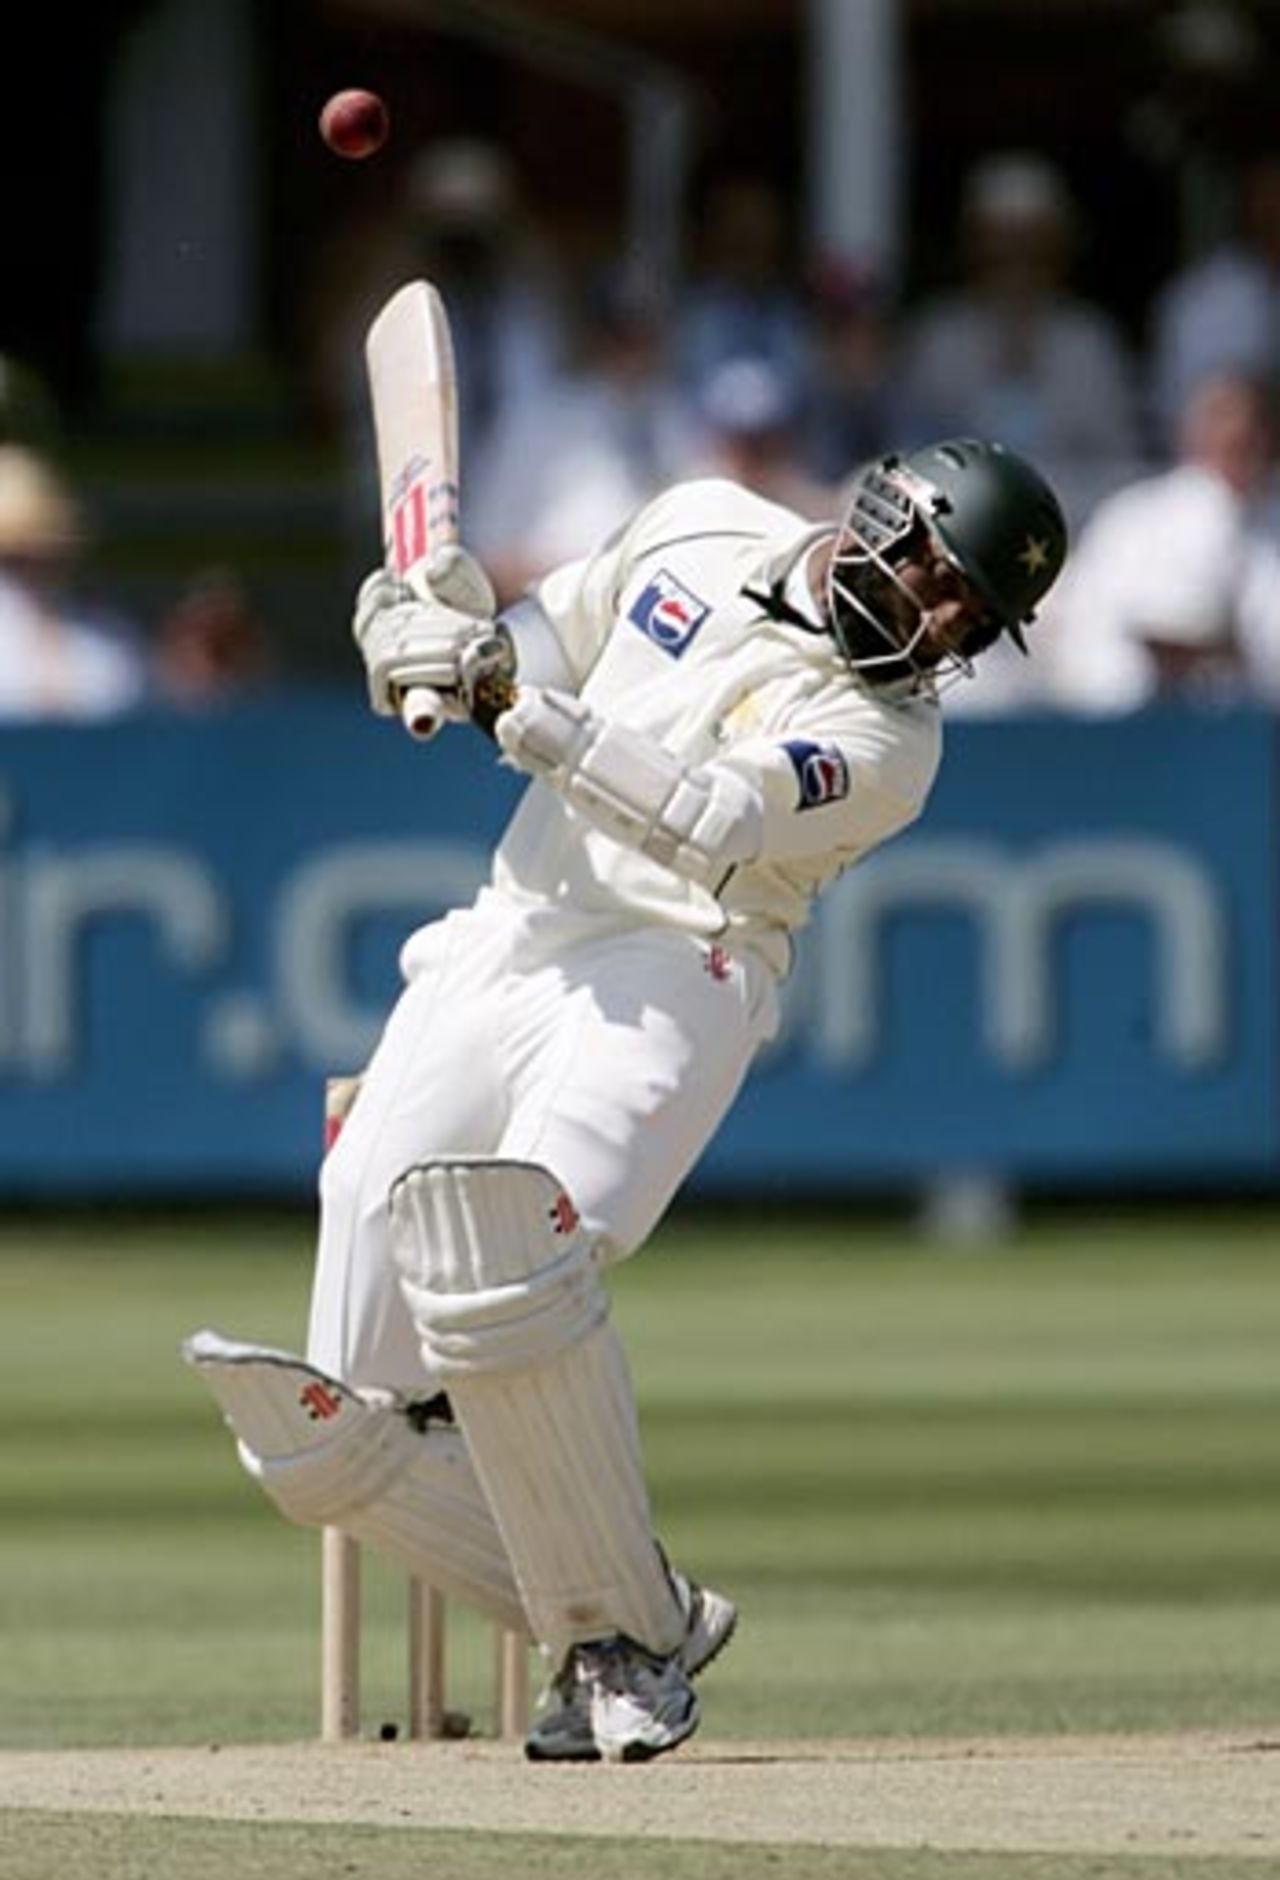 Mohammad Yousuf evades a bouncer, England v Pakistan, 1st Test, Lord's, July 16, 2006